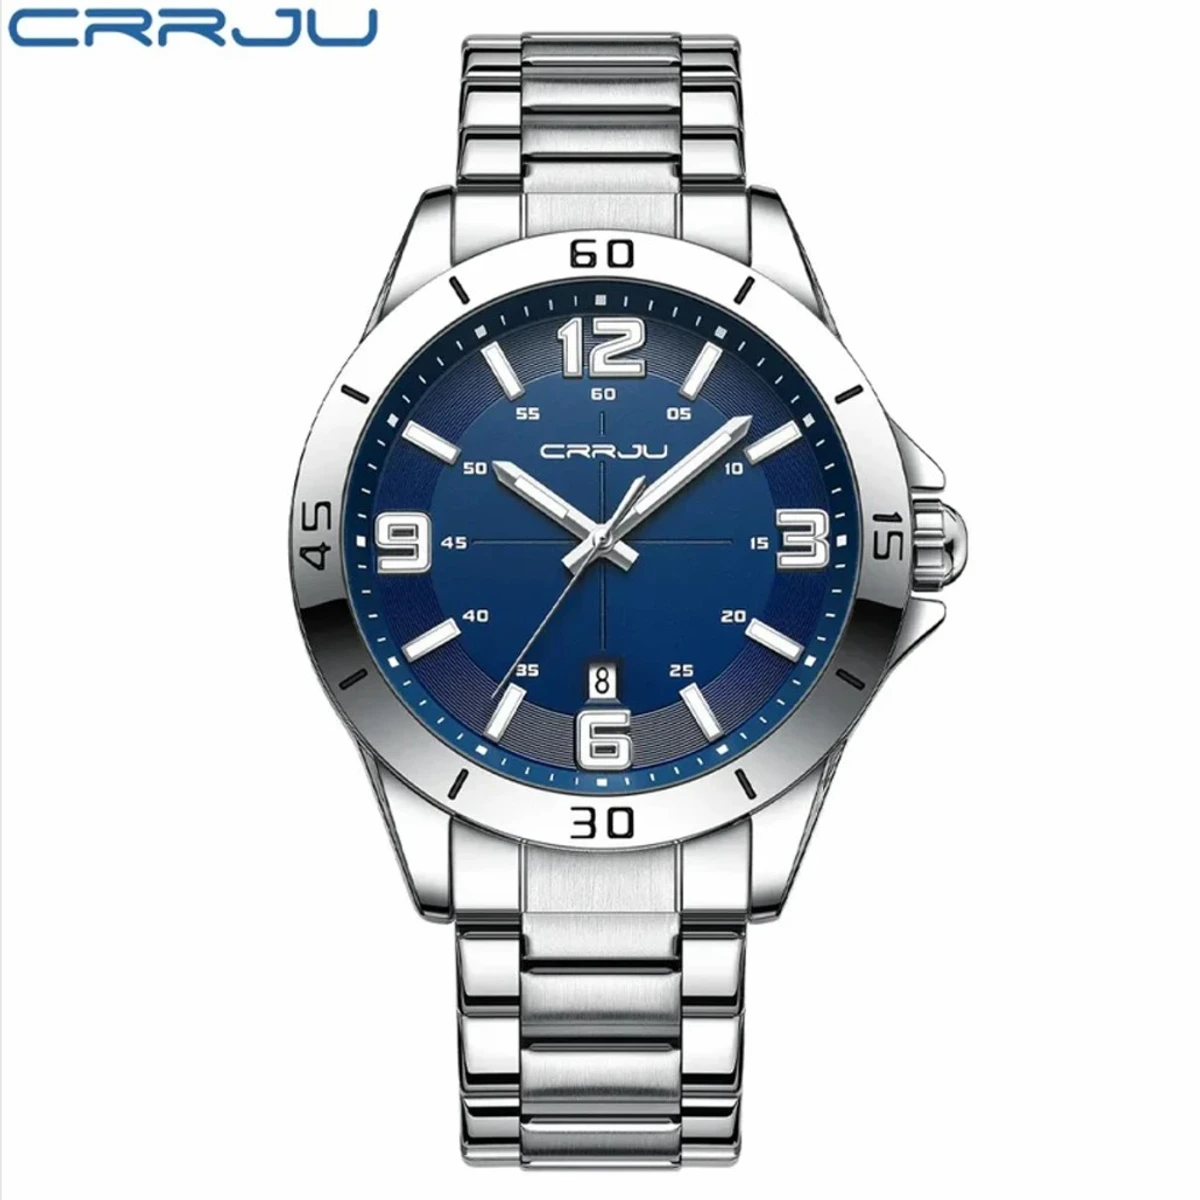 CRRJU Business Men Luxury Watches Stainless Steel Quartz Wrsitwatches Male Auto Date Clock with Luminous Hands